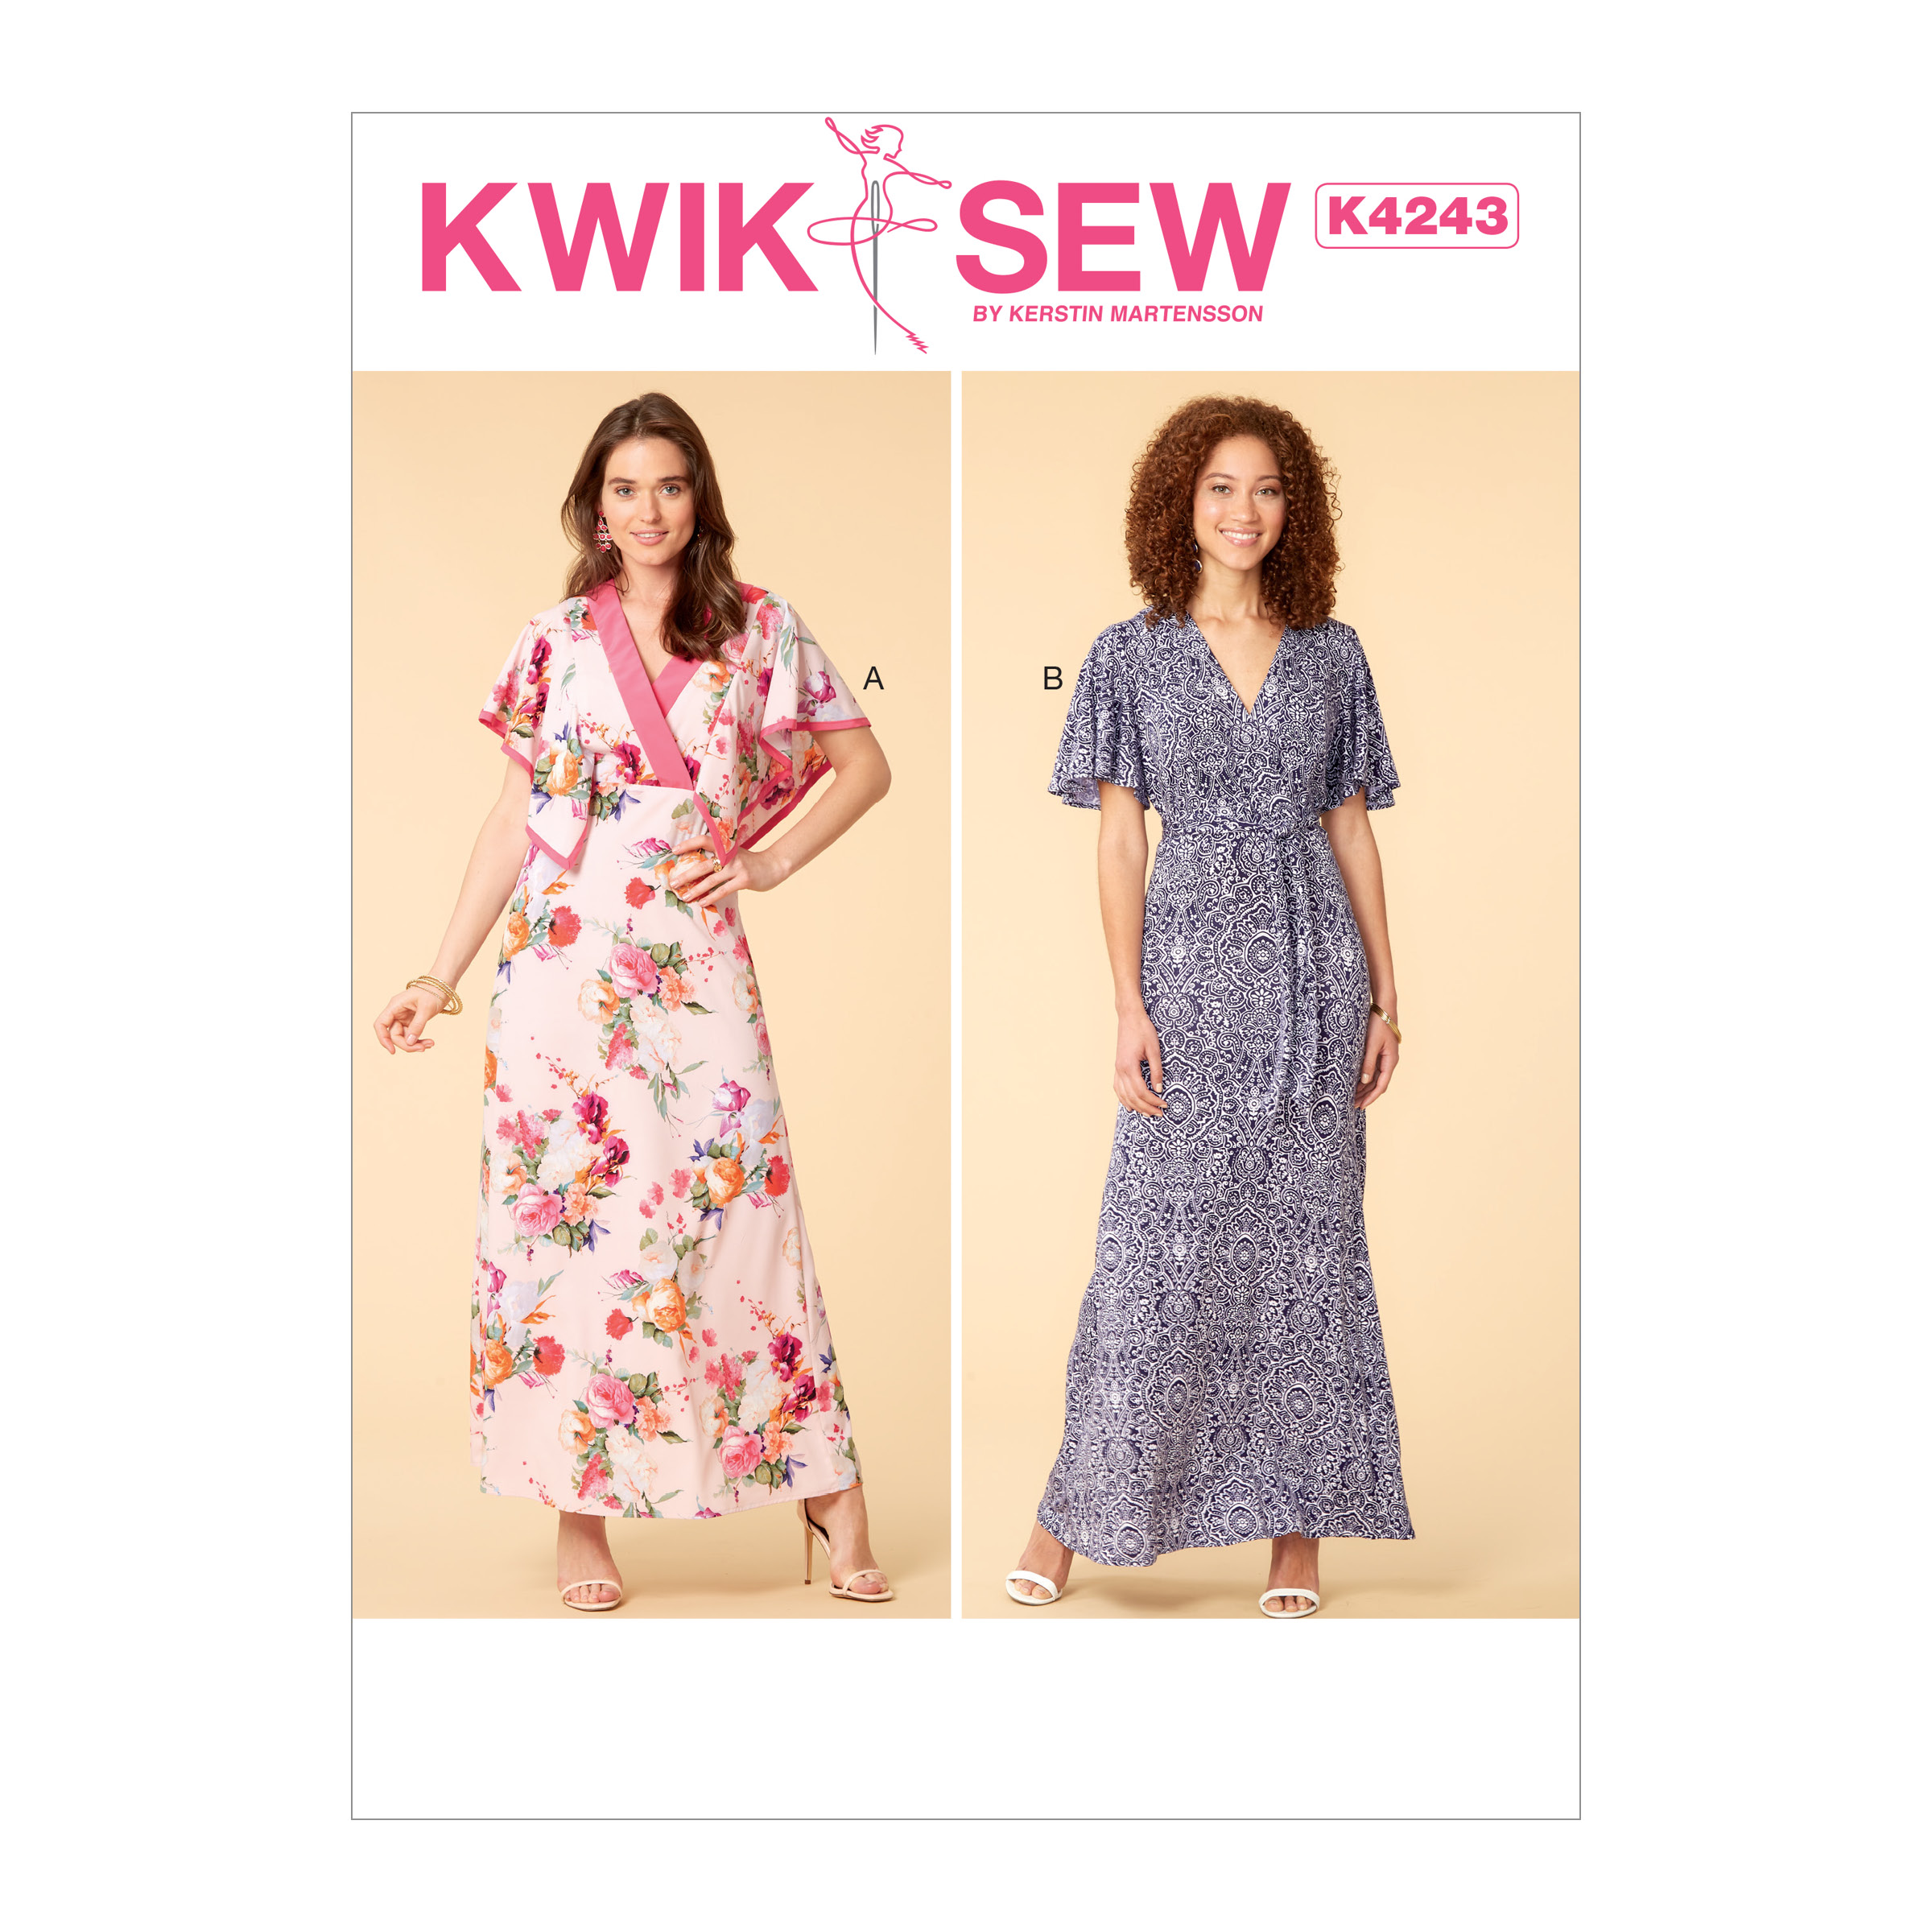 Kwik Sew - 3736 - The Sewing Place